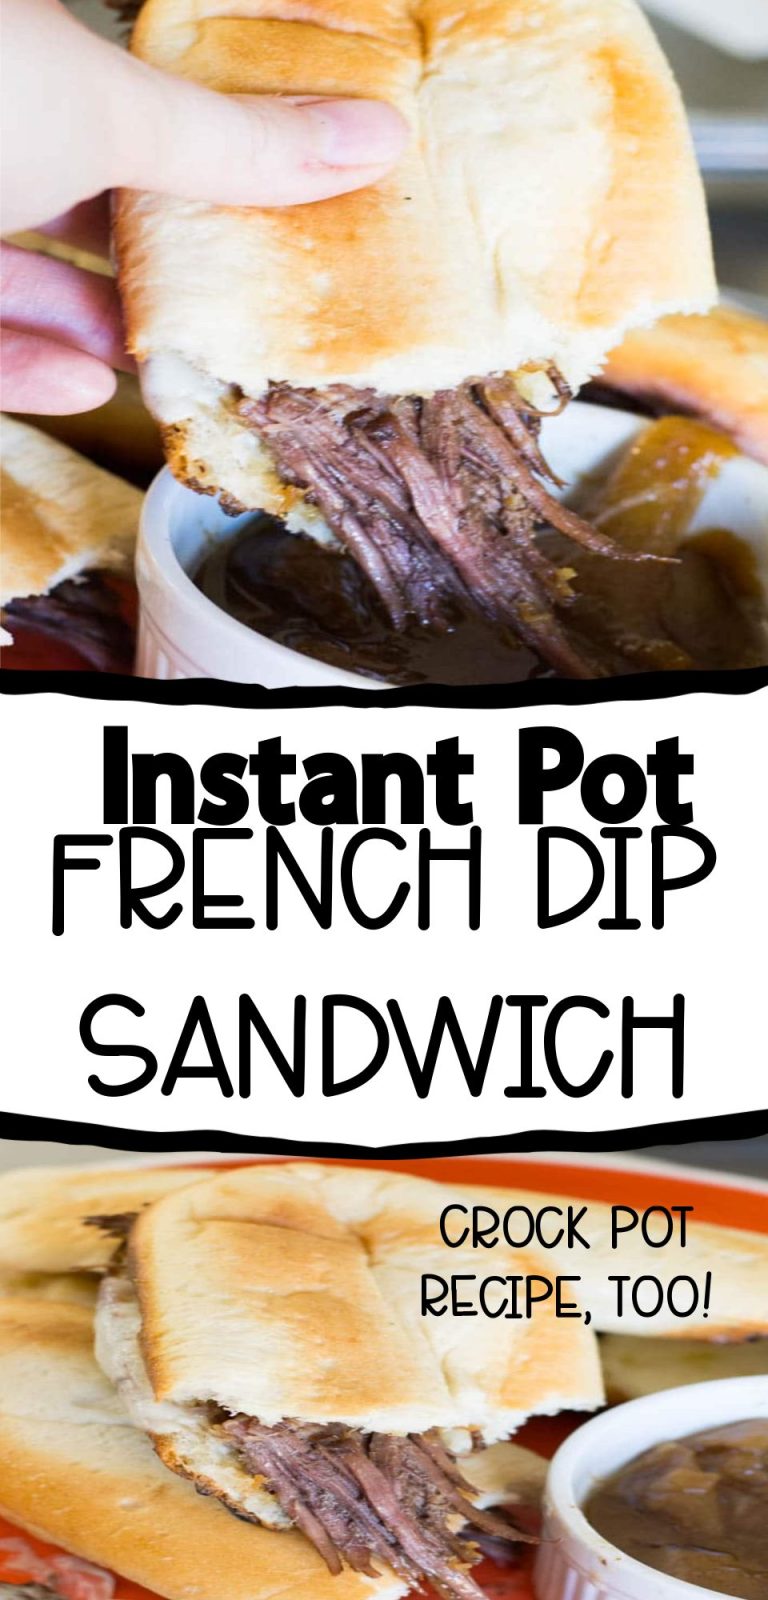 Instant Pot French Dip Sandwiches - What's in the Pot